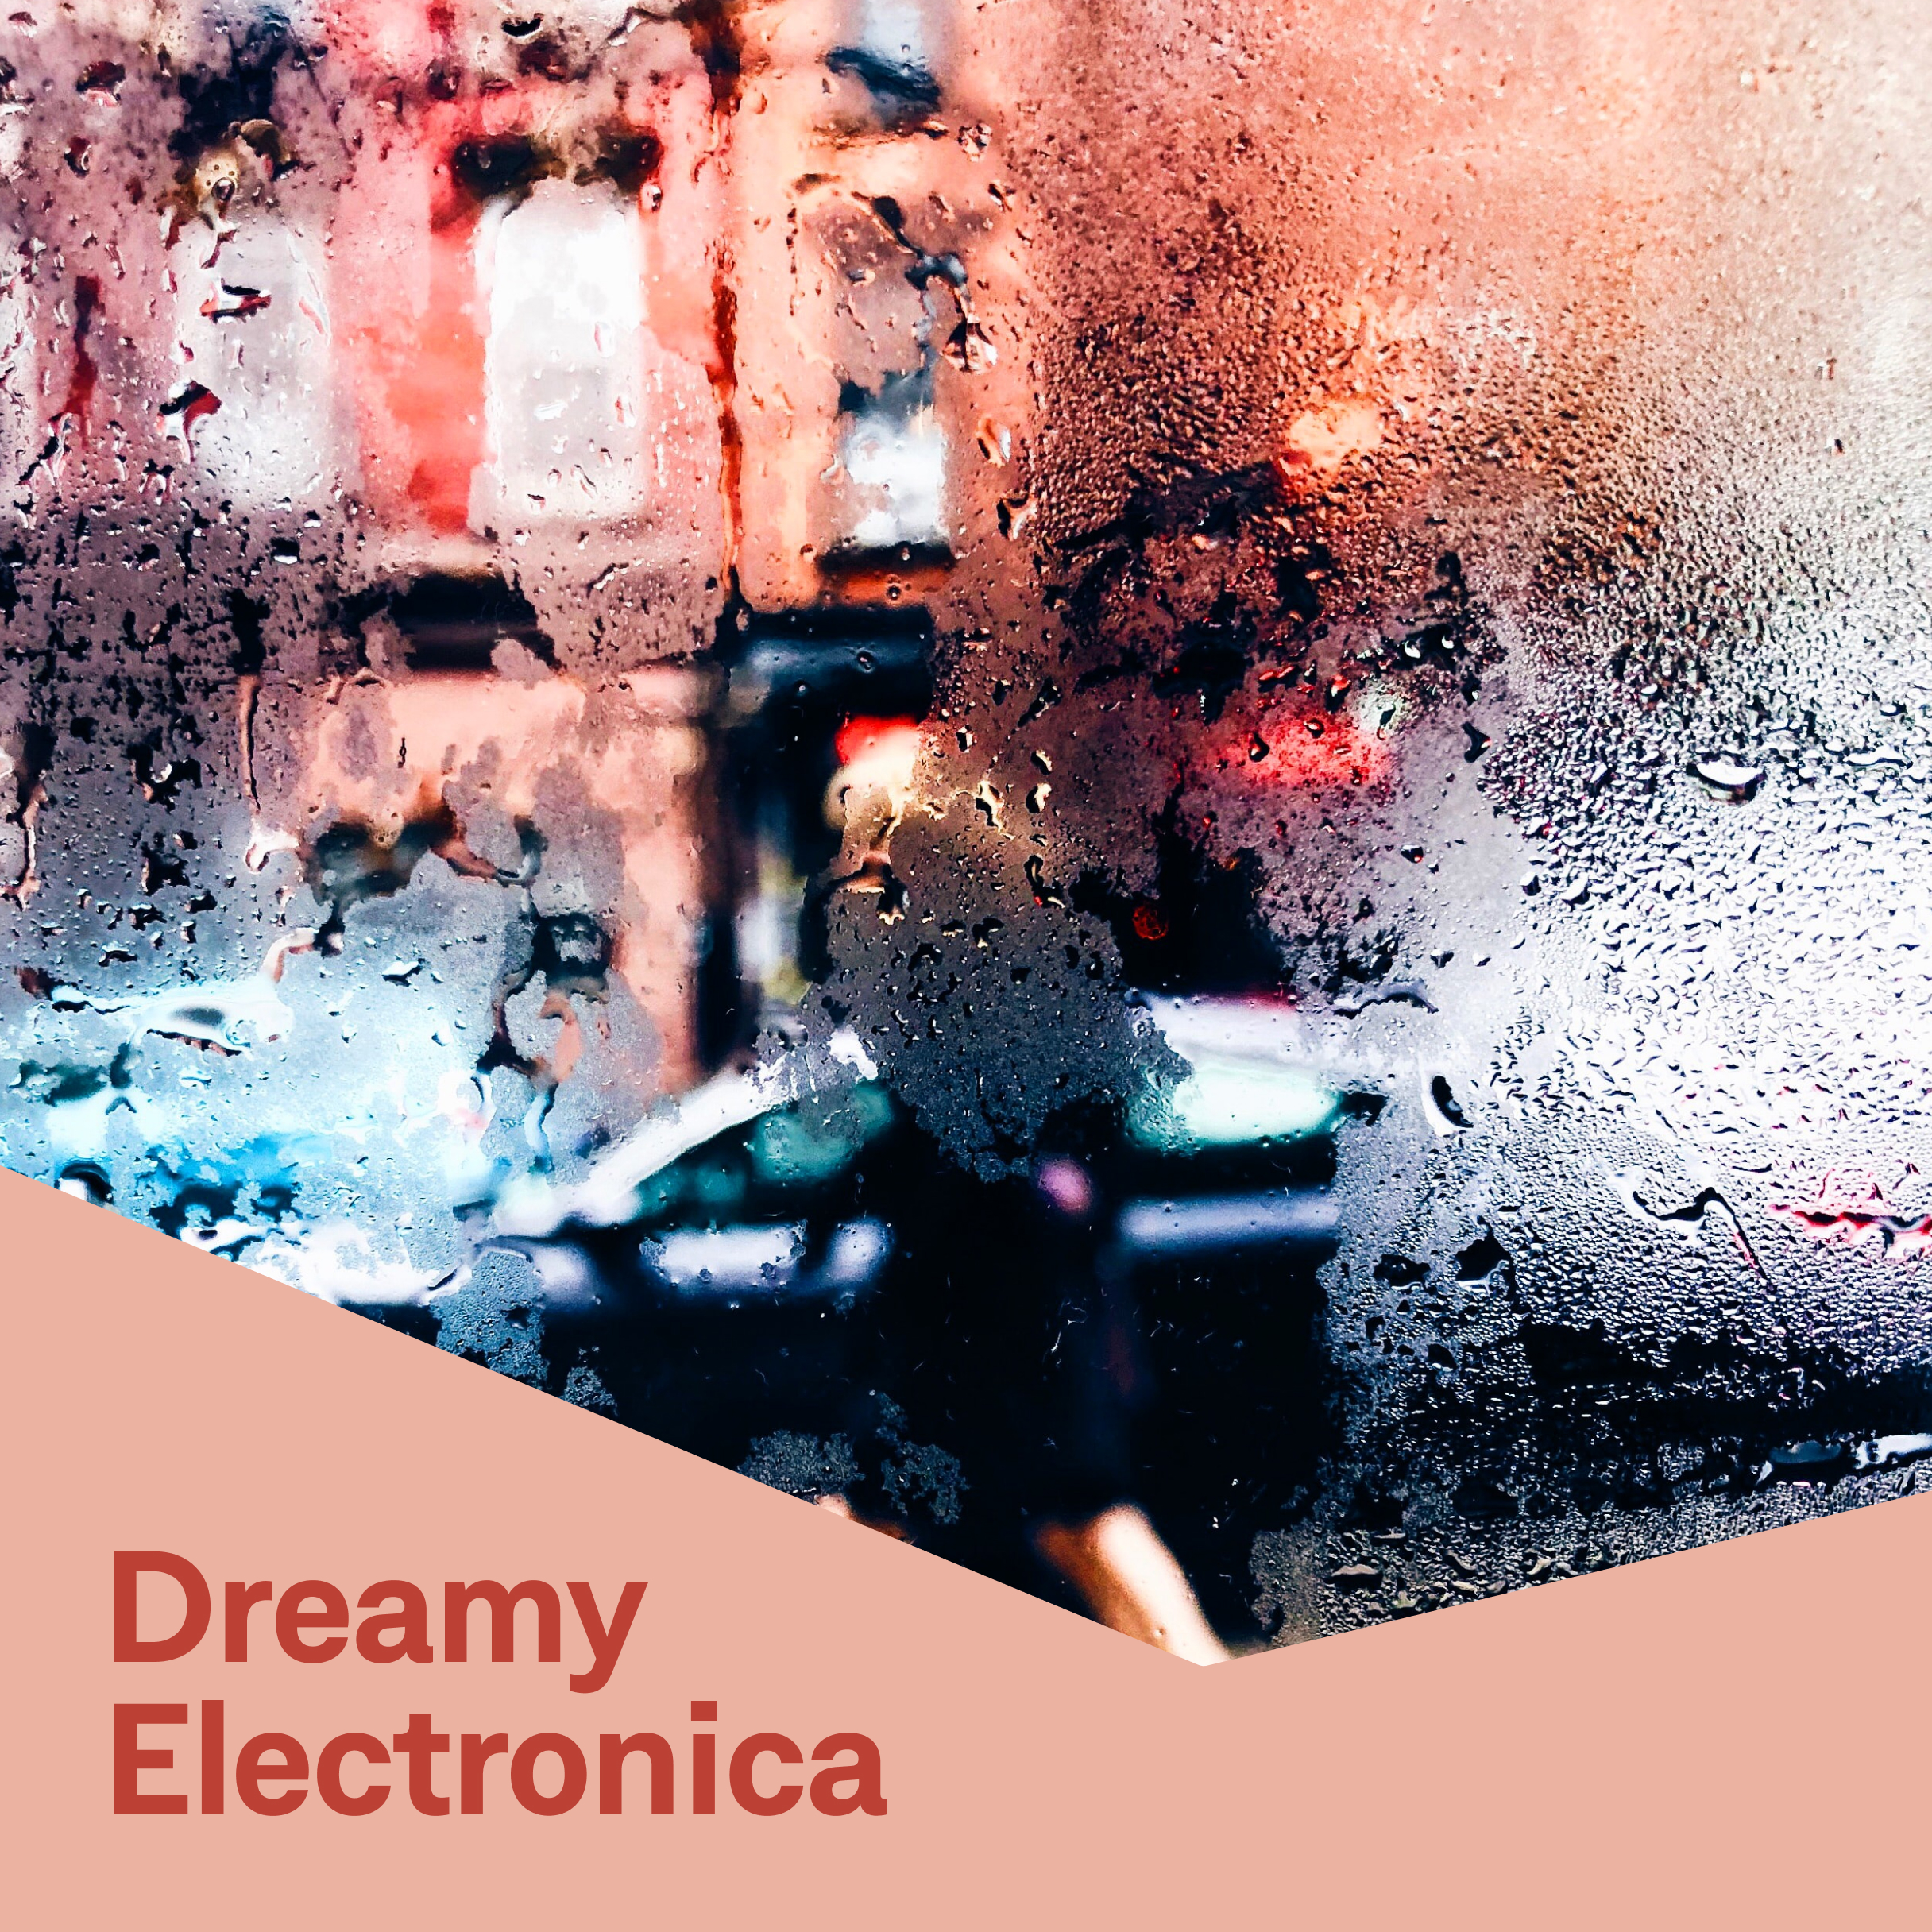 Dreamy Electronica